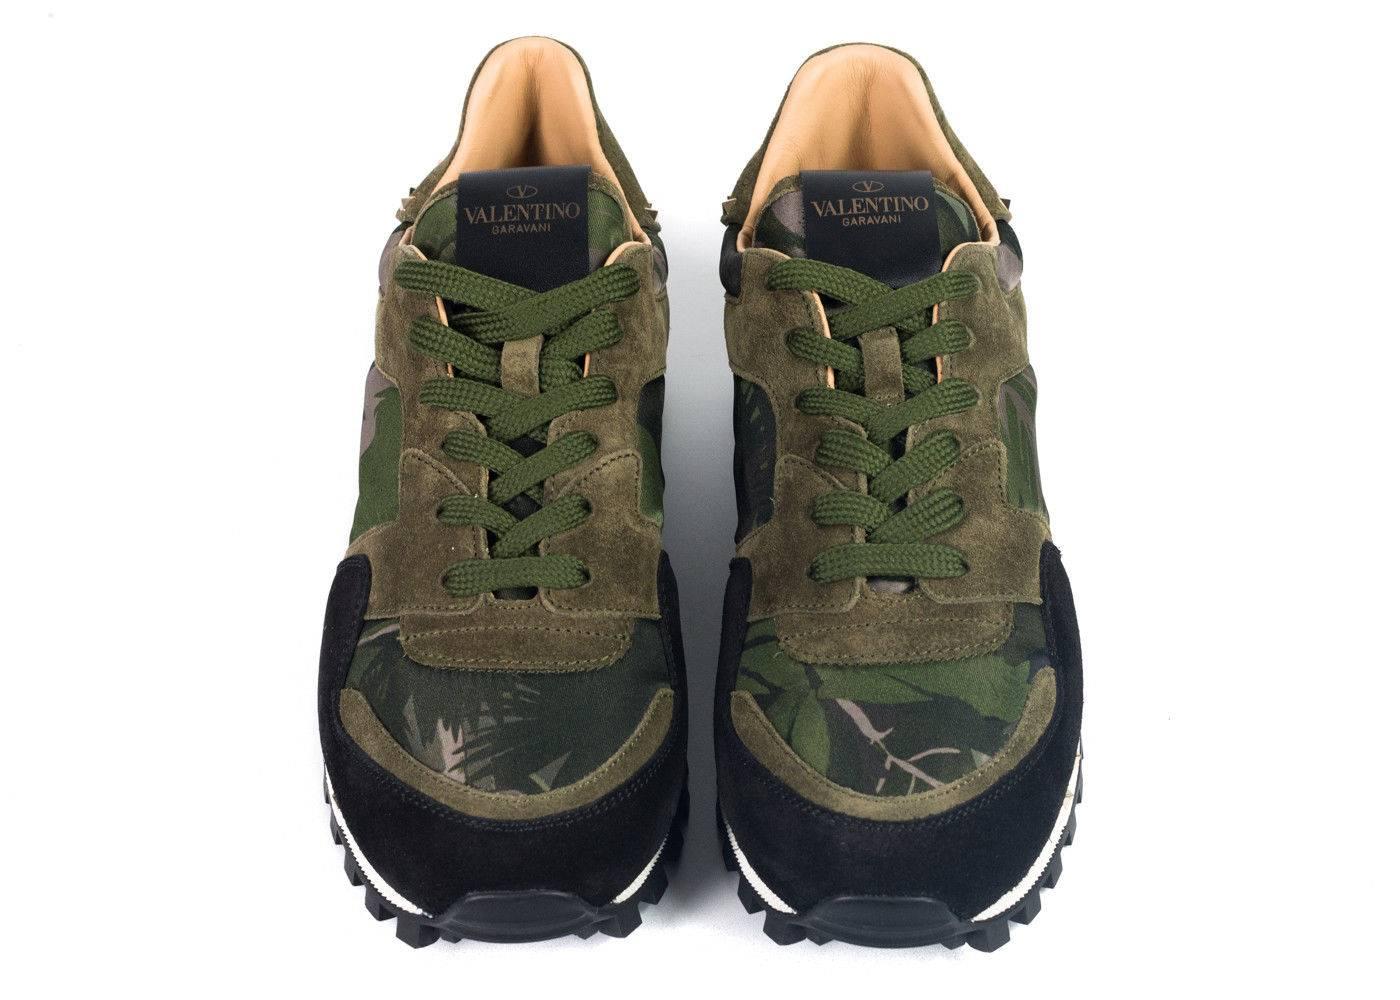 Brand New in Original Box and Dust Bag
Retails in Stores and Online for $795
Size Euro 45 US 12 Fits True To Size


Low-top nylon sneakers featuring camouflage pattern in green and black. Suede trim in green throughout. Round toe. Lace-up closure.